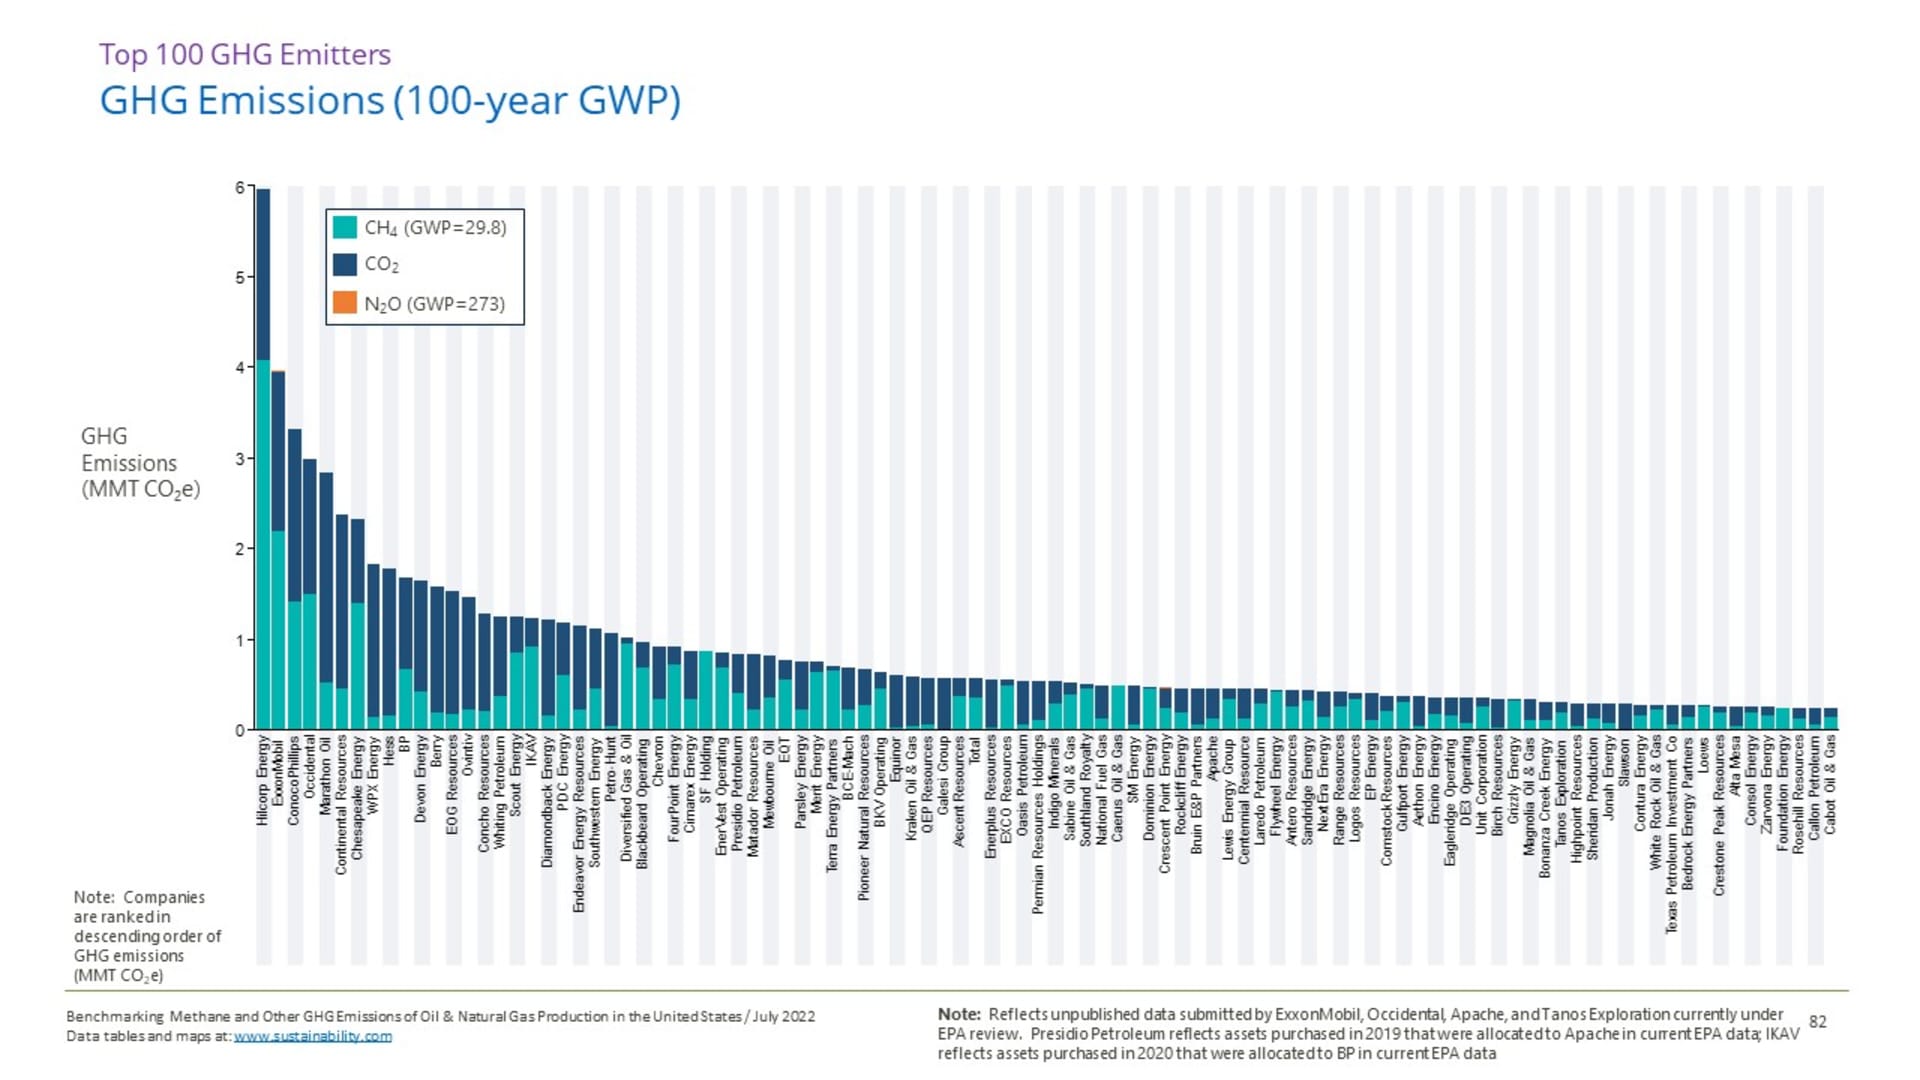 Top greenhouse gas emitting oil and gas companies in 2020, the latest year data is available from the EPA. This chart is from the new report tracking emissions data from the nonprofit groups Clean Air Task Force and Ceres, who commissioned the sustainability consultancy ERM to develop the report.